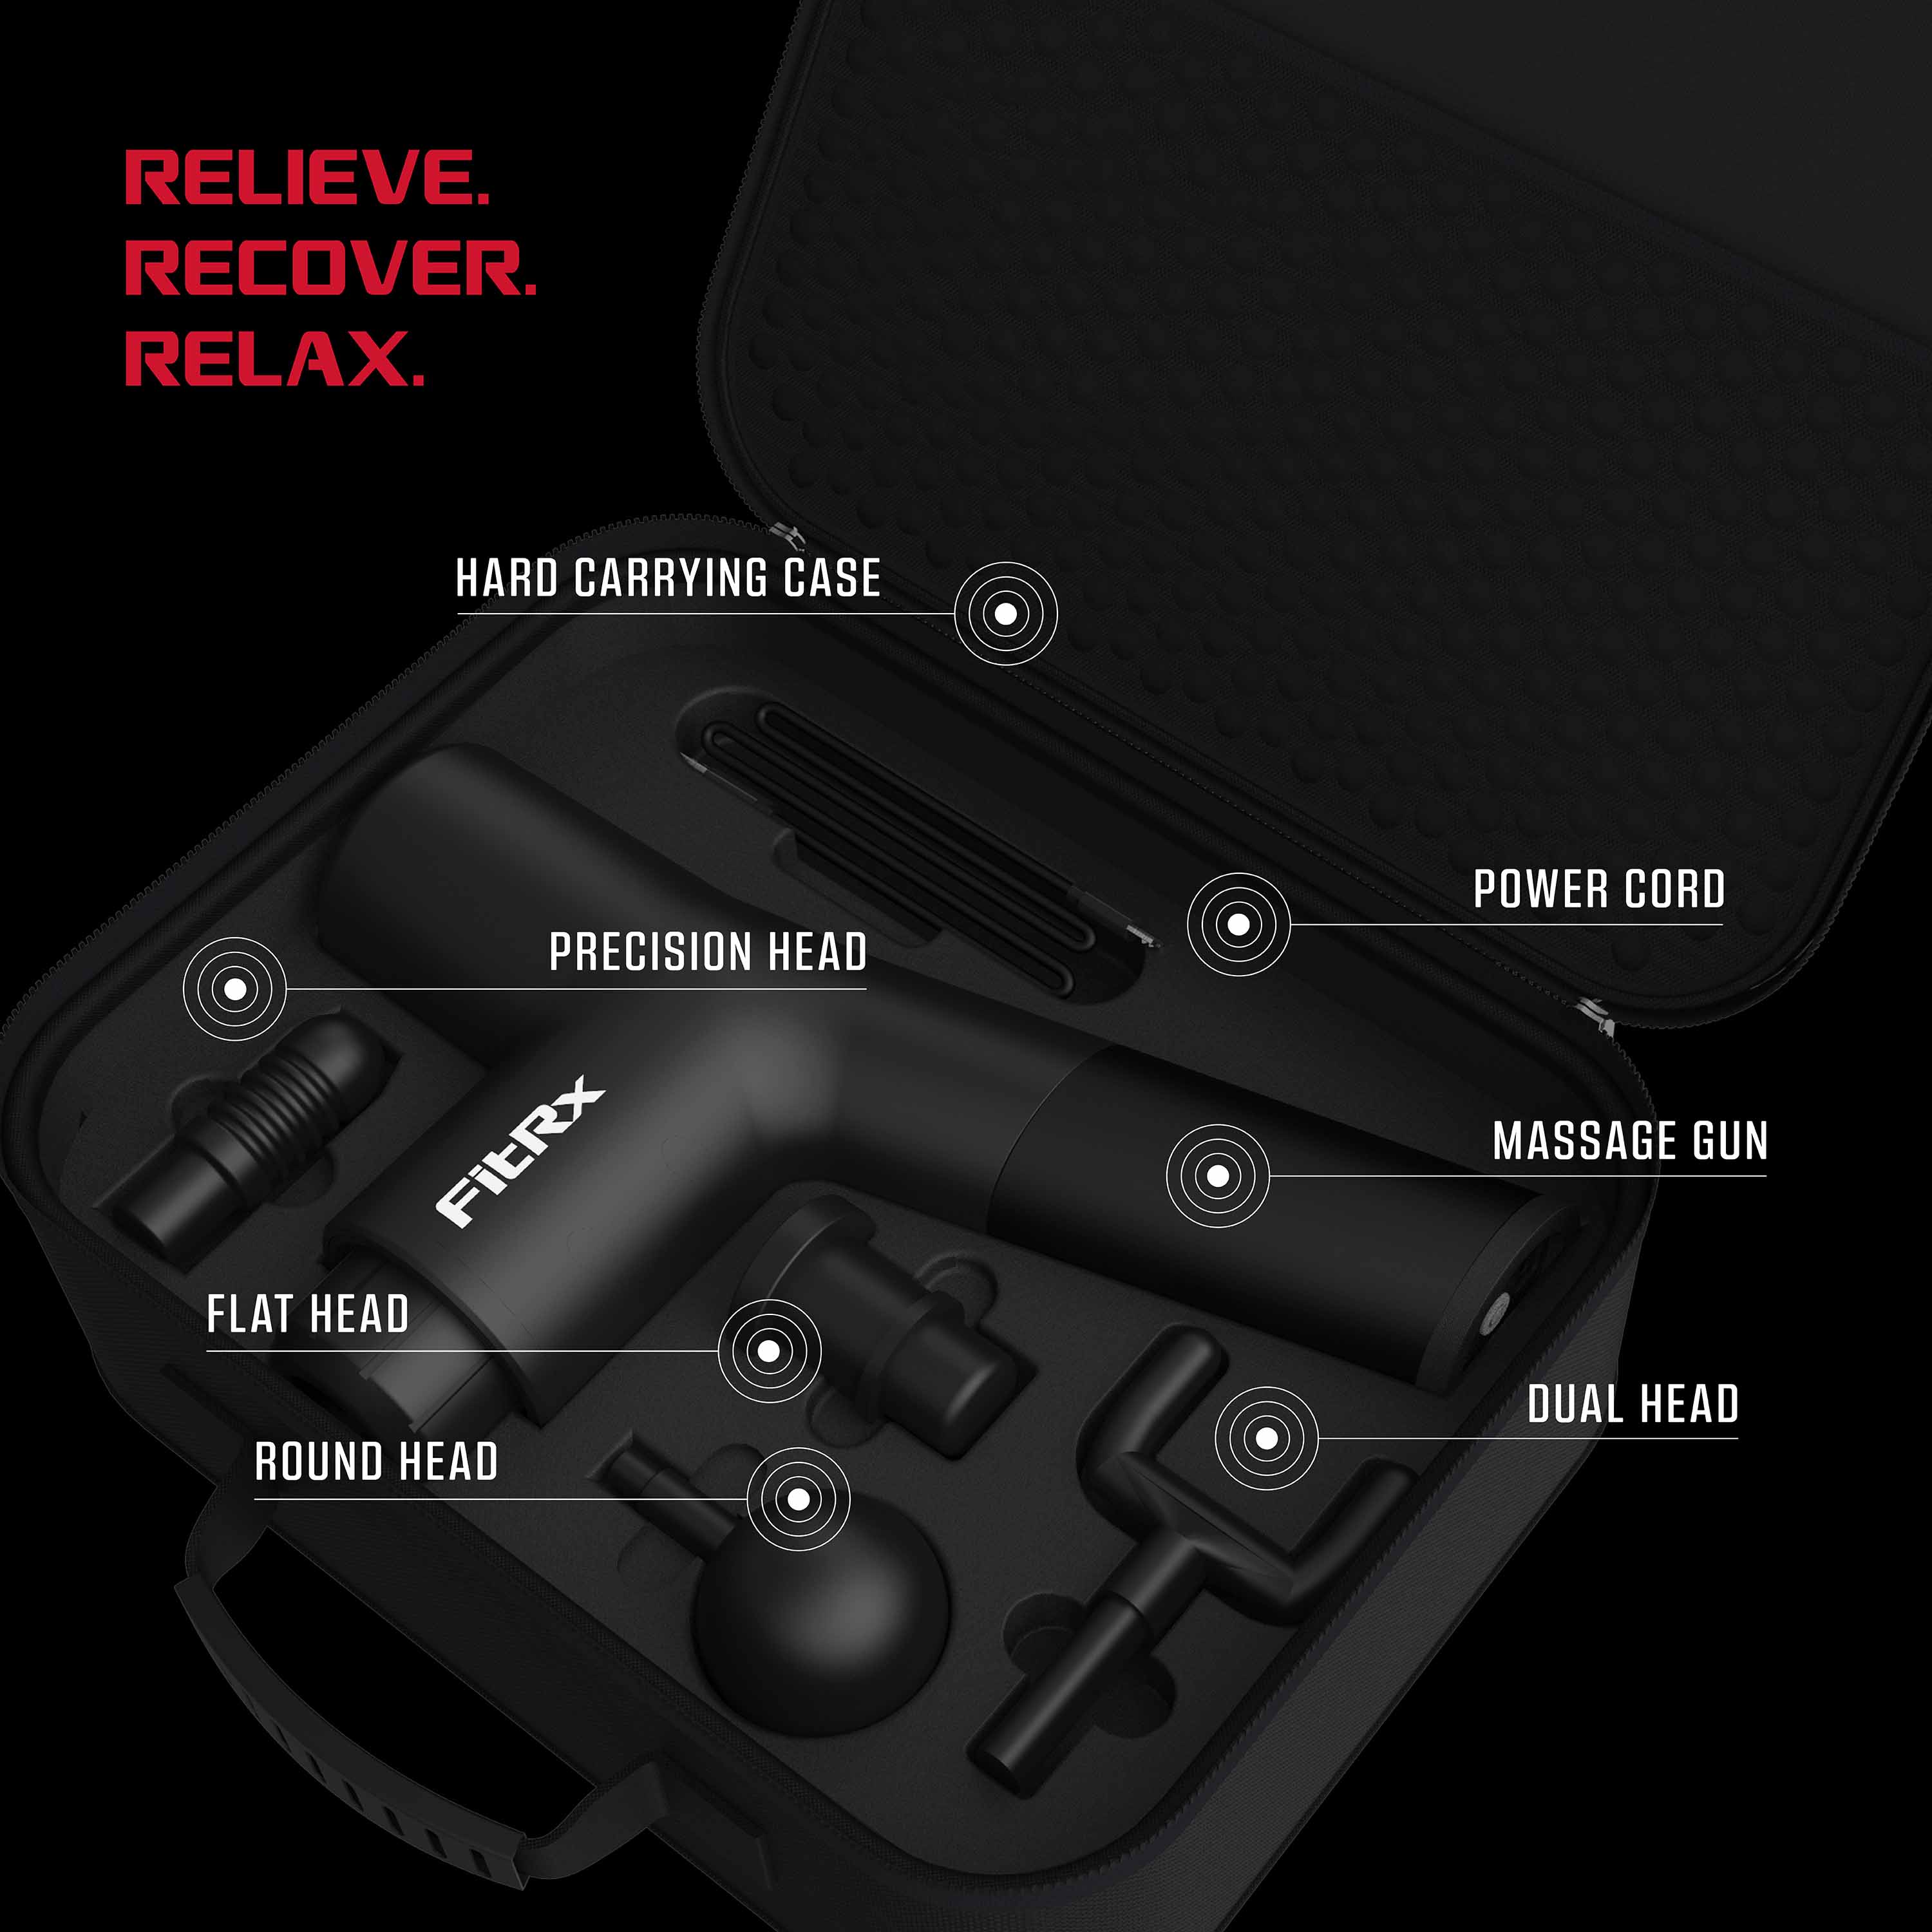 FitRx Neck and Back Massager, Handheld Percussion Massage Gun with Multiple Speeds and Attachments - image 4 of 14